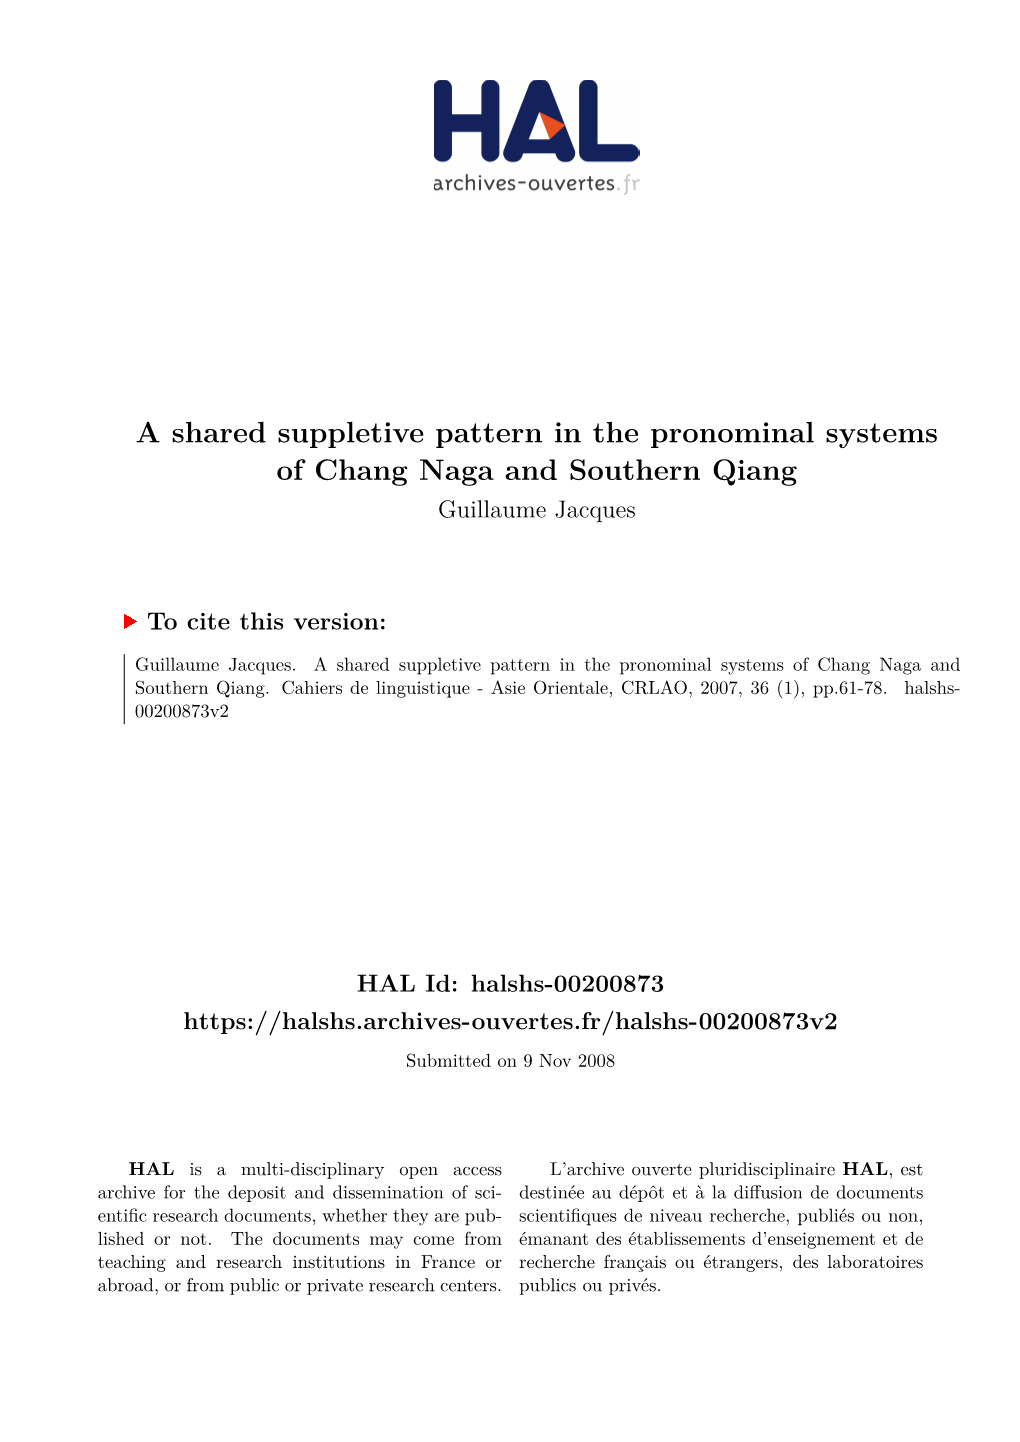 A Shared Suppletive Pattern in the Pronominal Systems of Chang Naga and Southern Qiang Guillaume Jacques